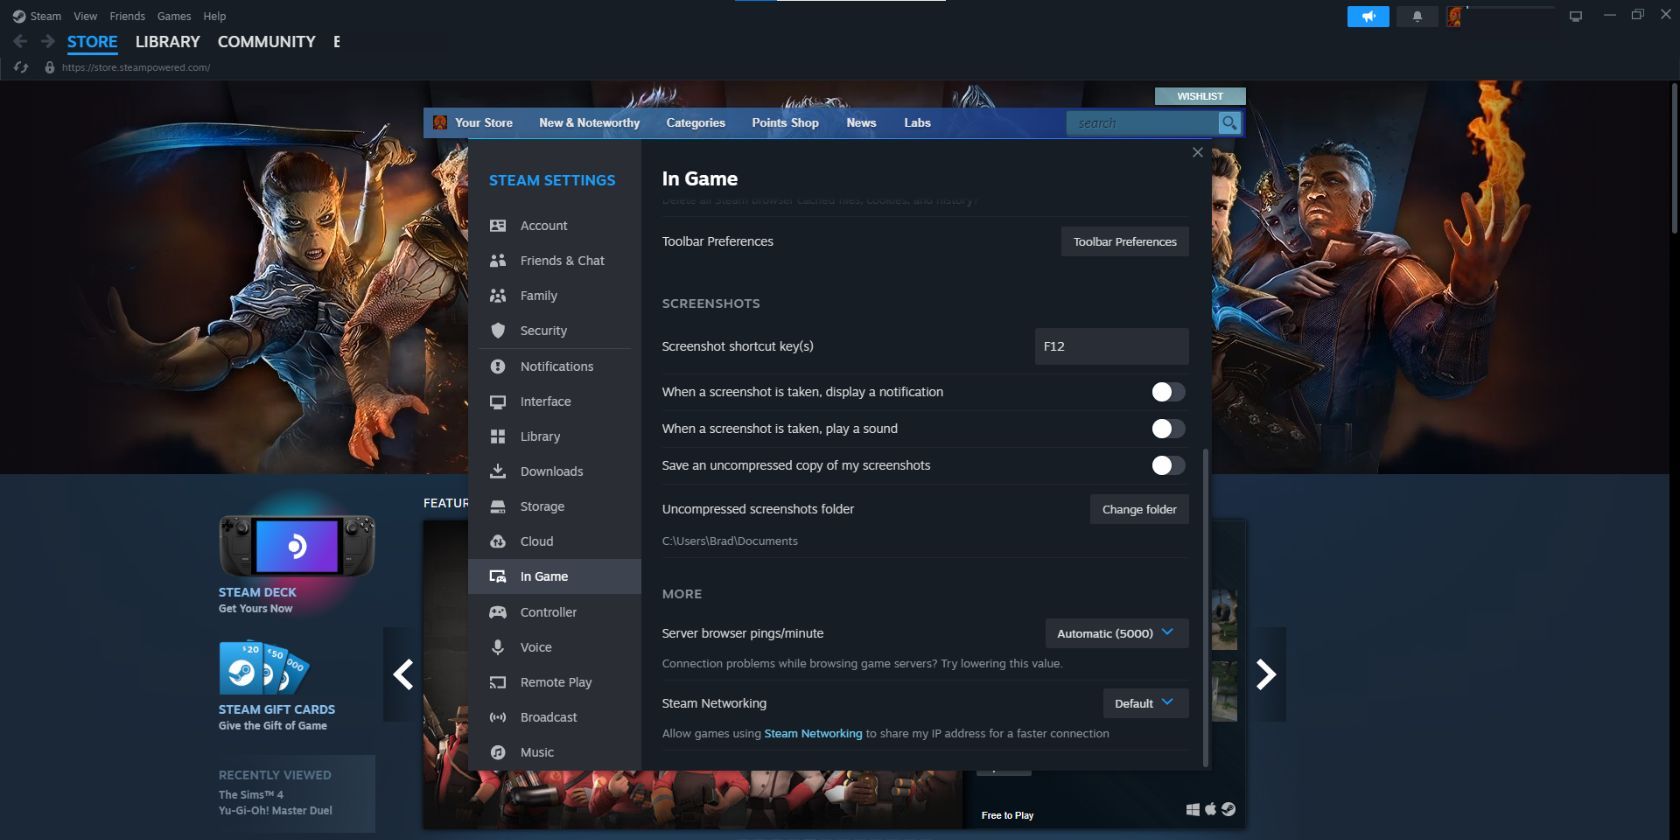 The In Game settings menu on Steam